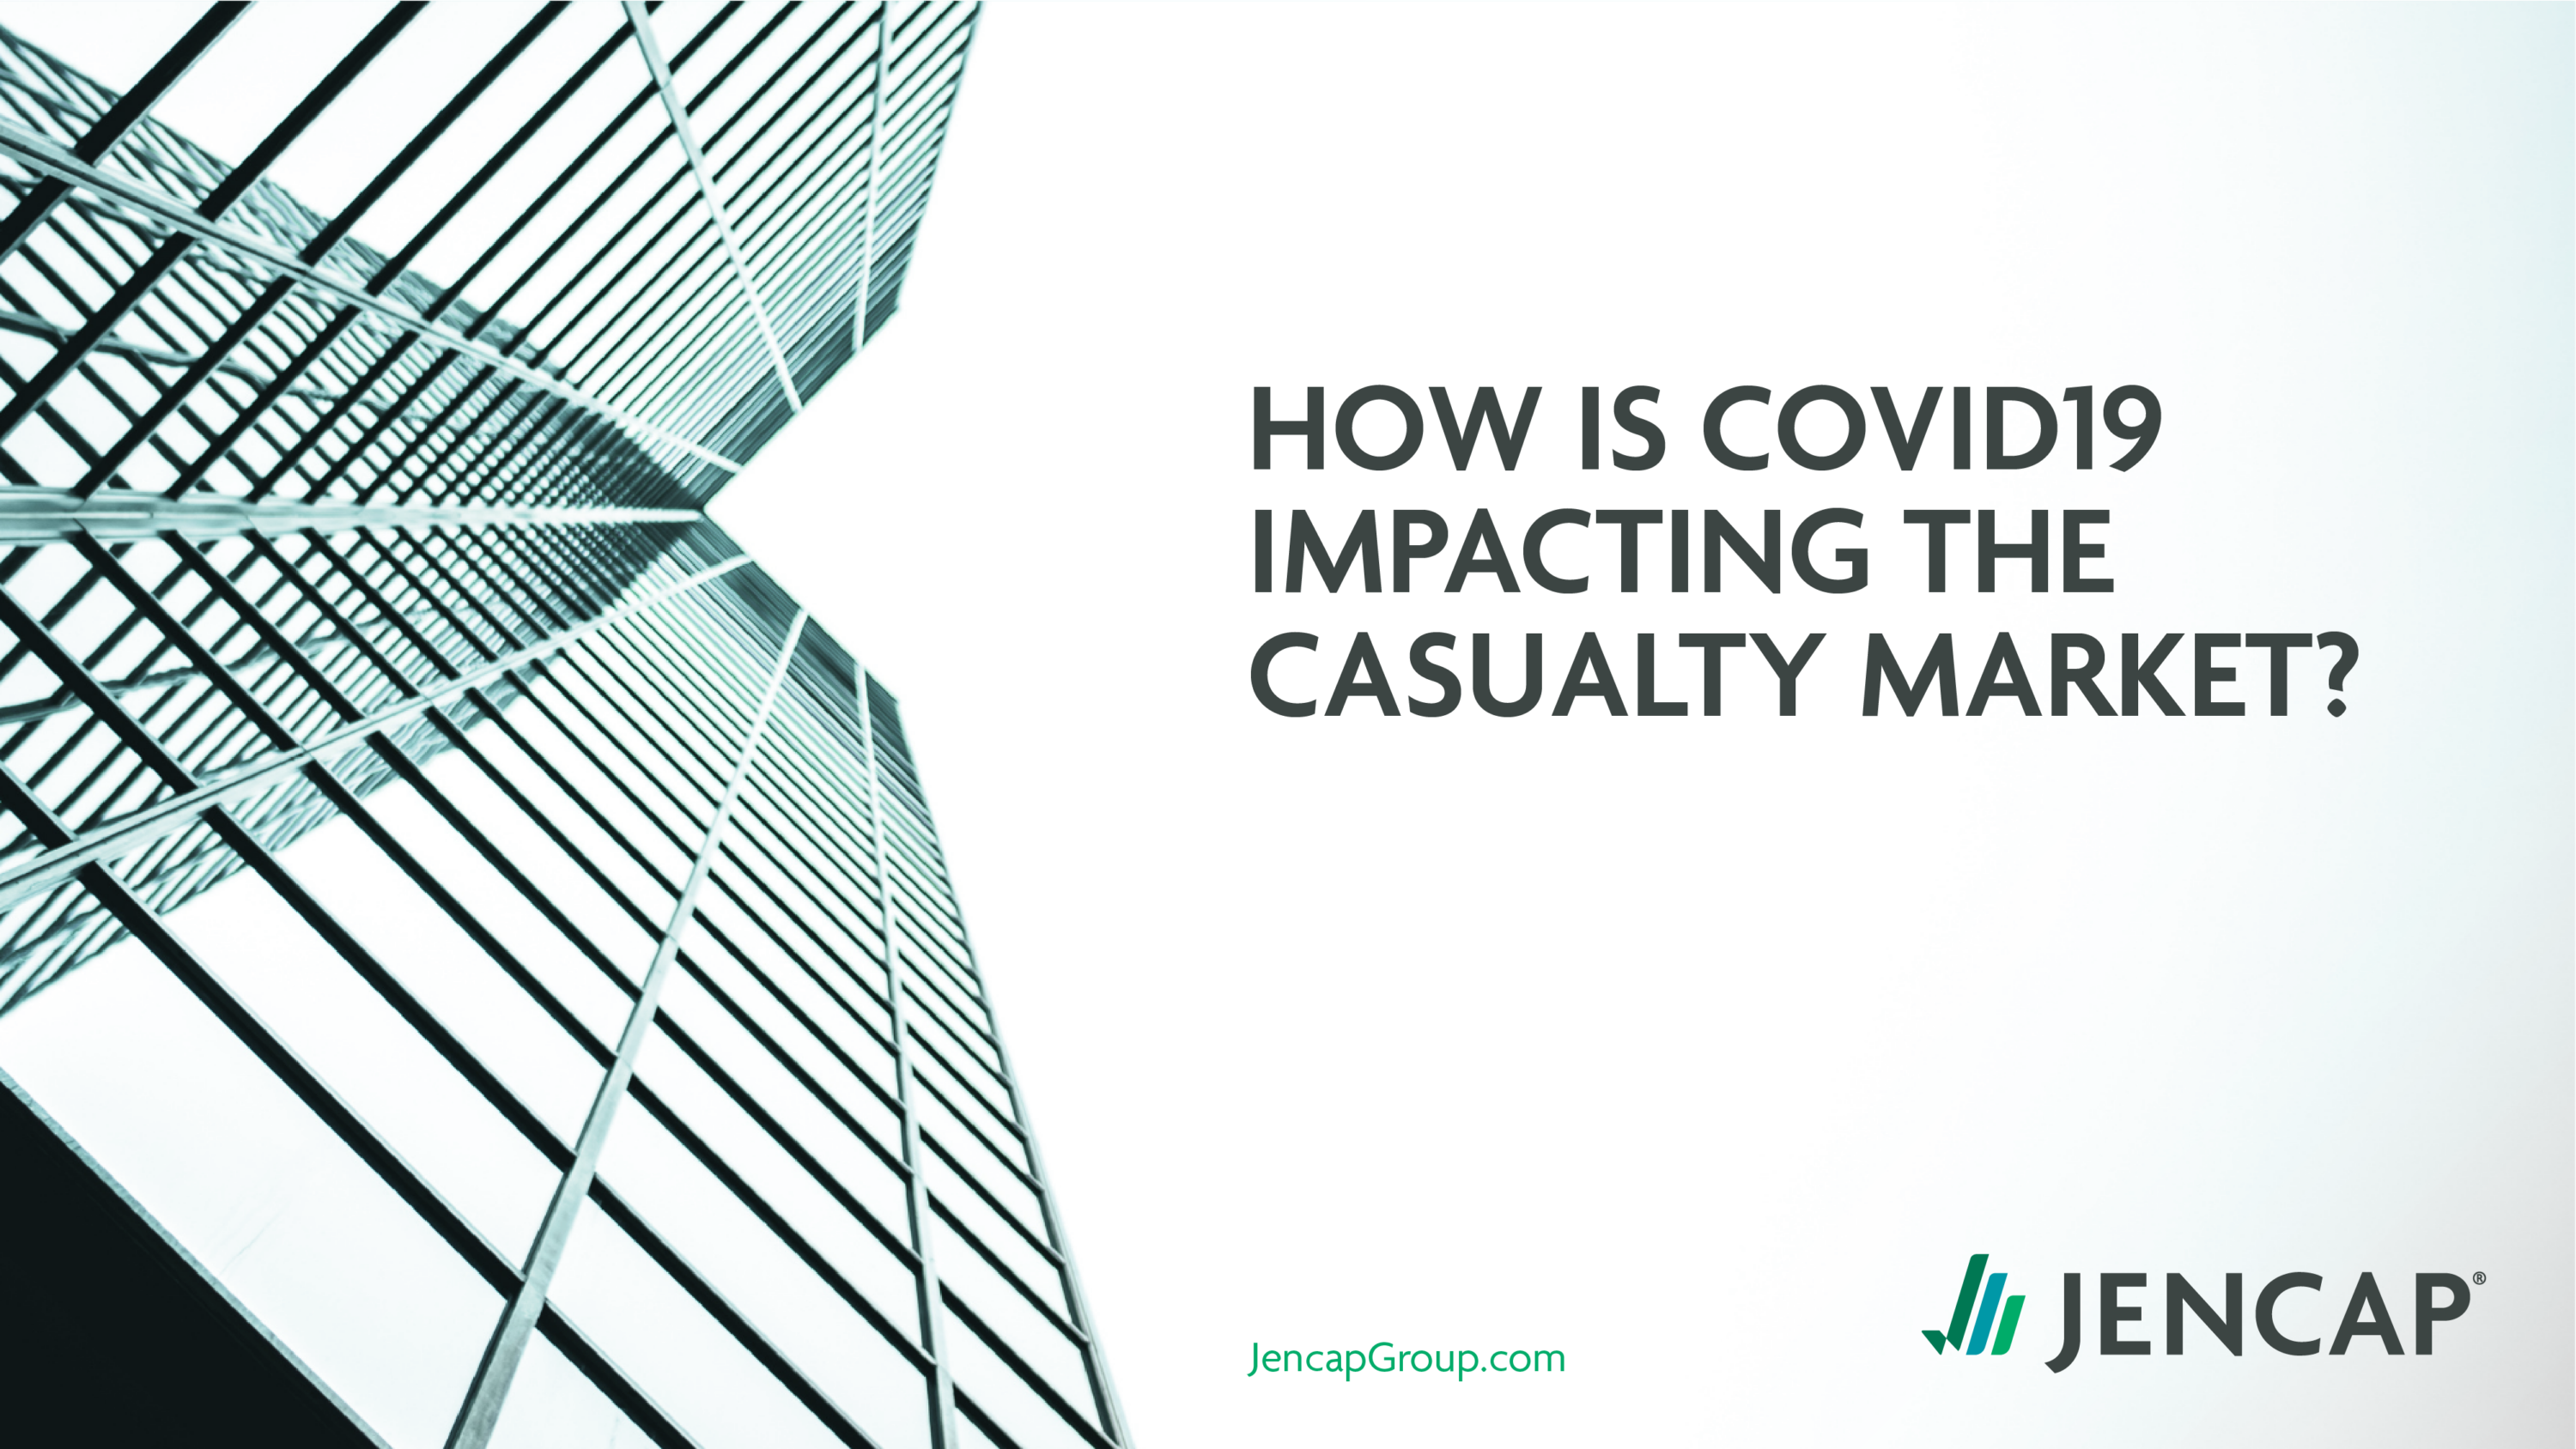 How is COVID19 impacting the Casualty Market?